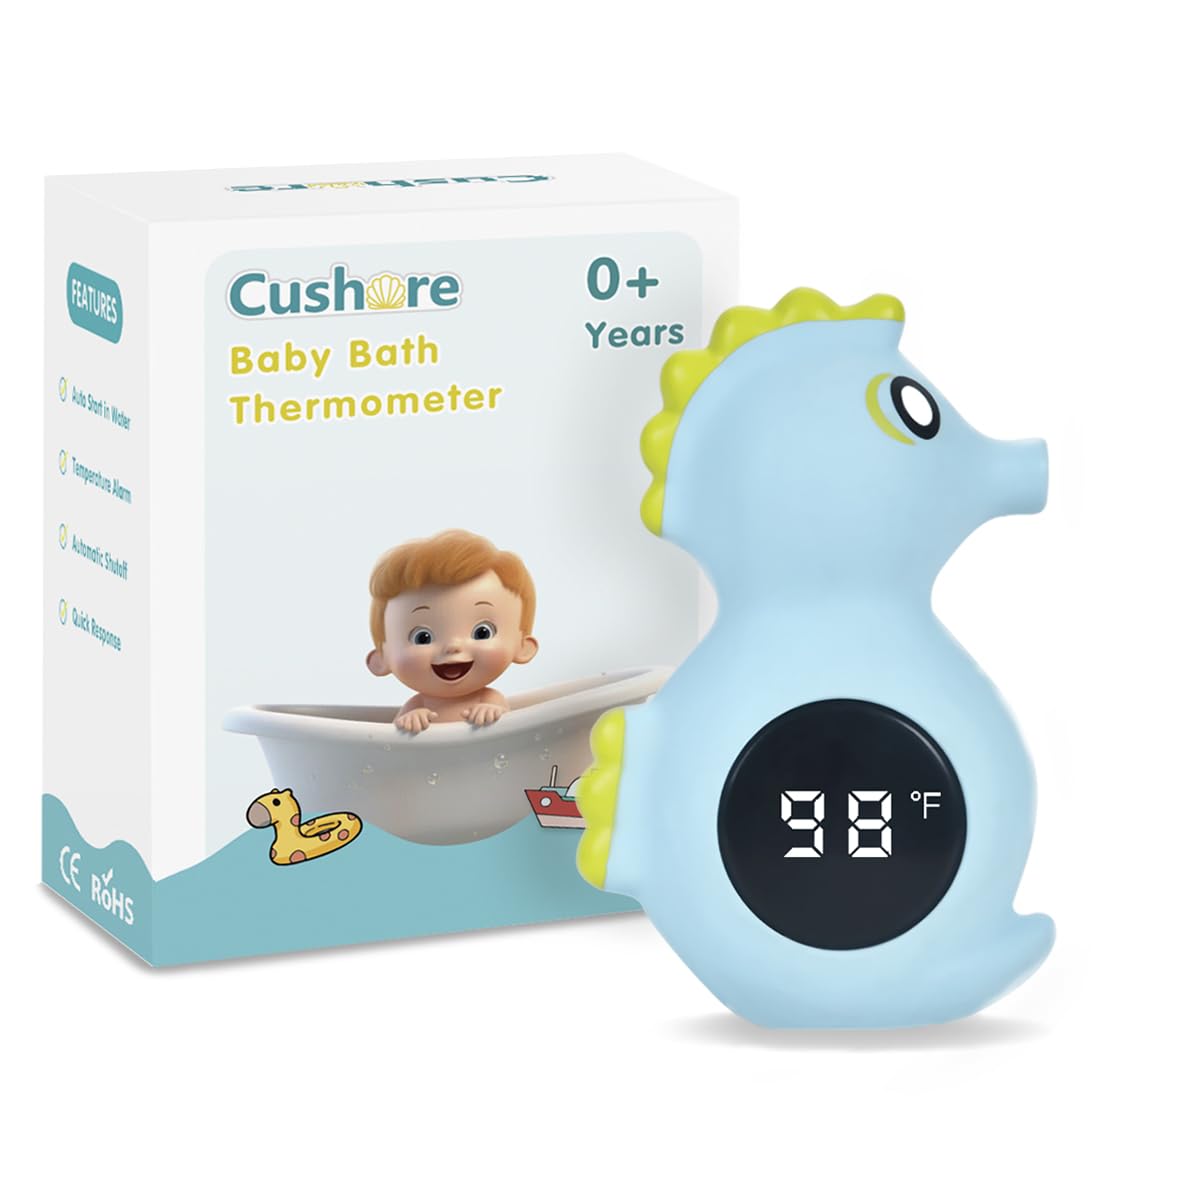 Baby Bath Thermometer Safety, Auto ON/Off Waterproof Bathtub Thermometer, Digital Shower Water Temperature Sensor, Bathtub Floating Toy, Seahorse